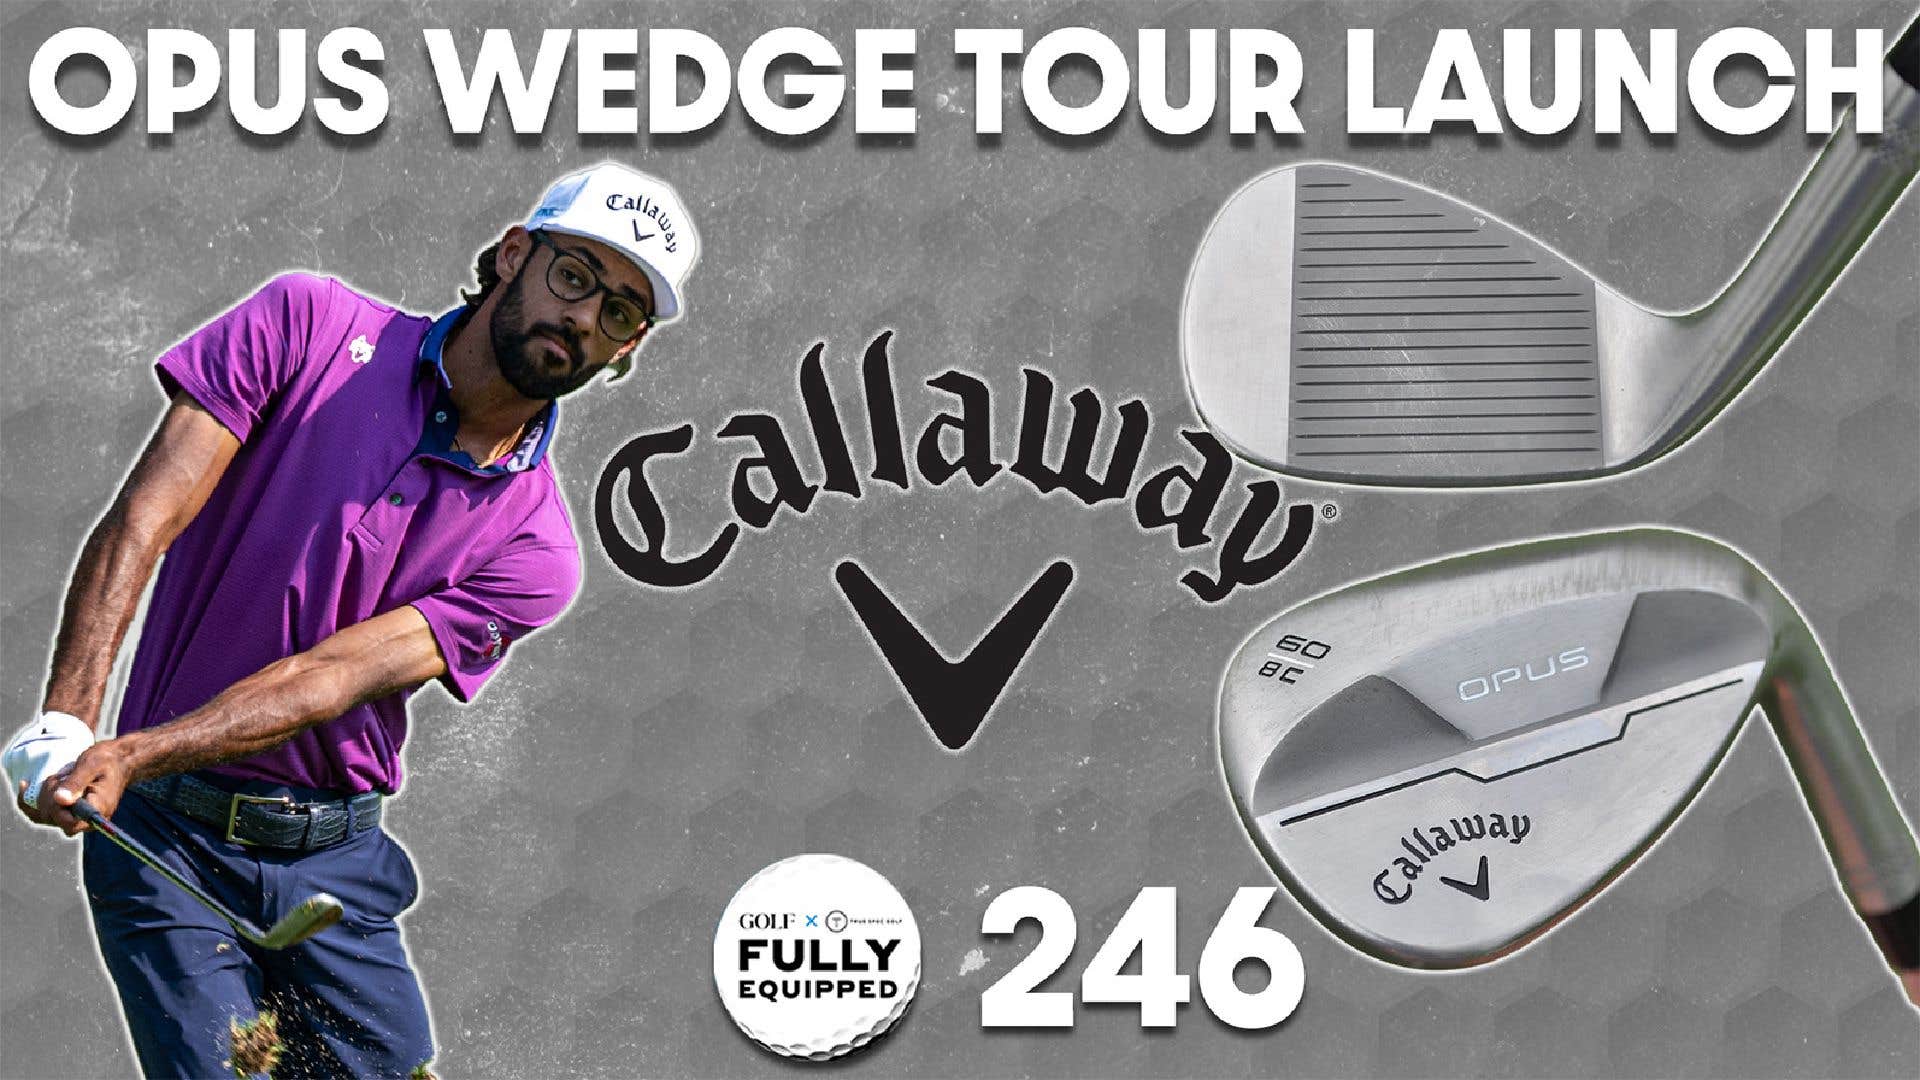 Callaway's new Opus wedge line debuts on tour | Fully Equipped